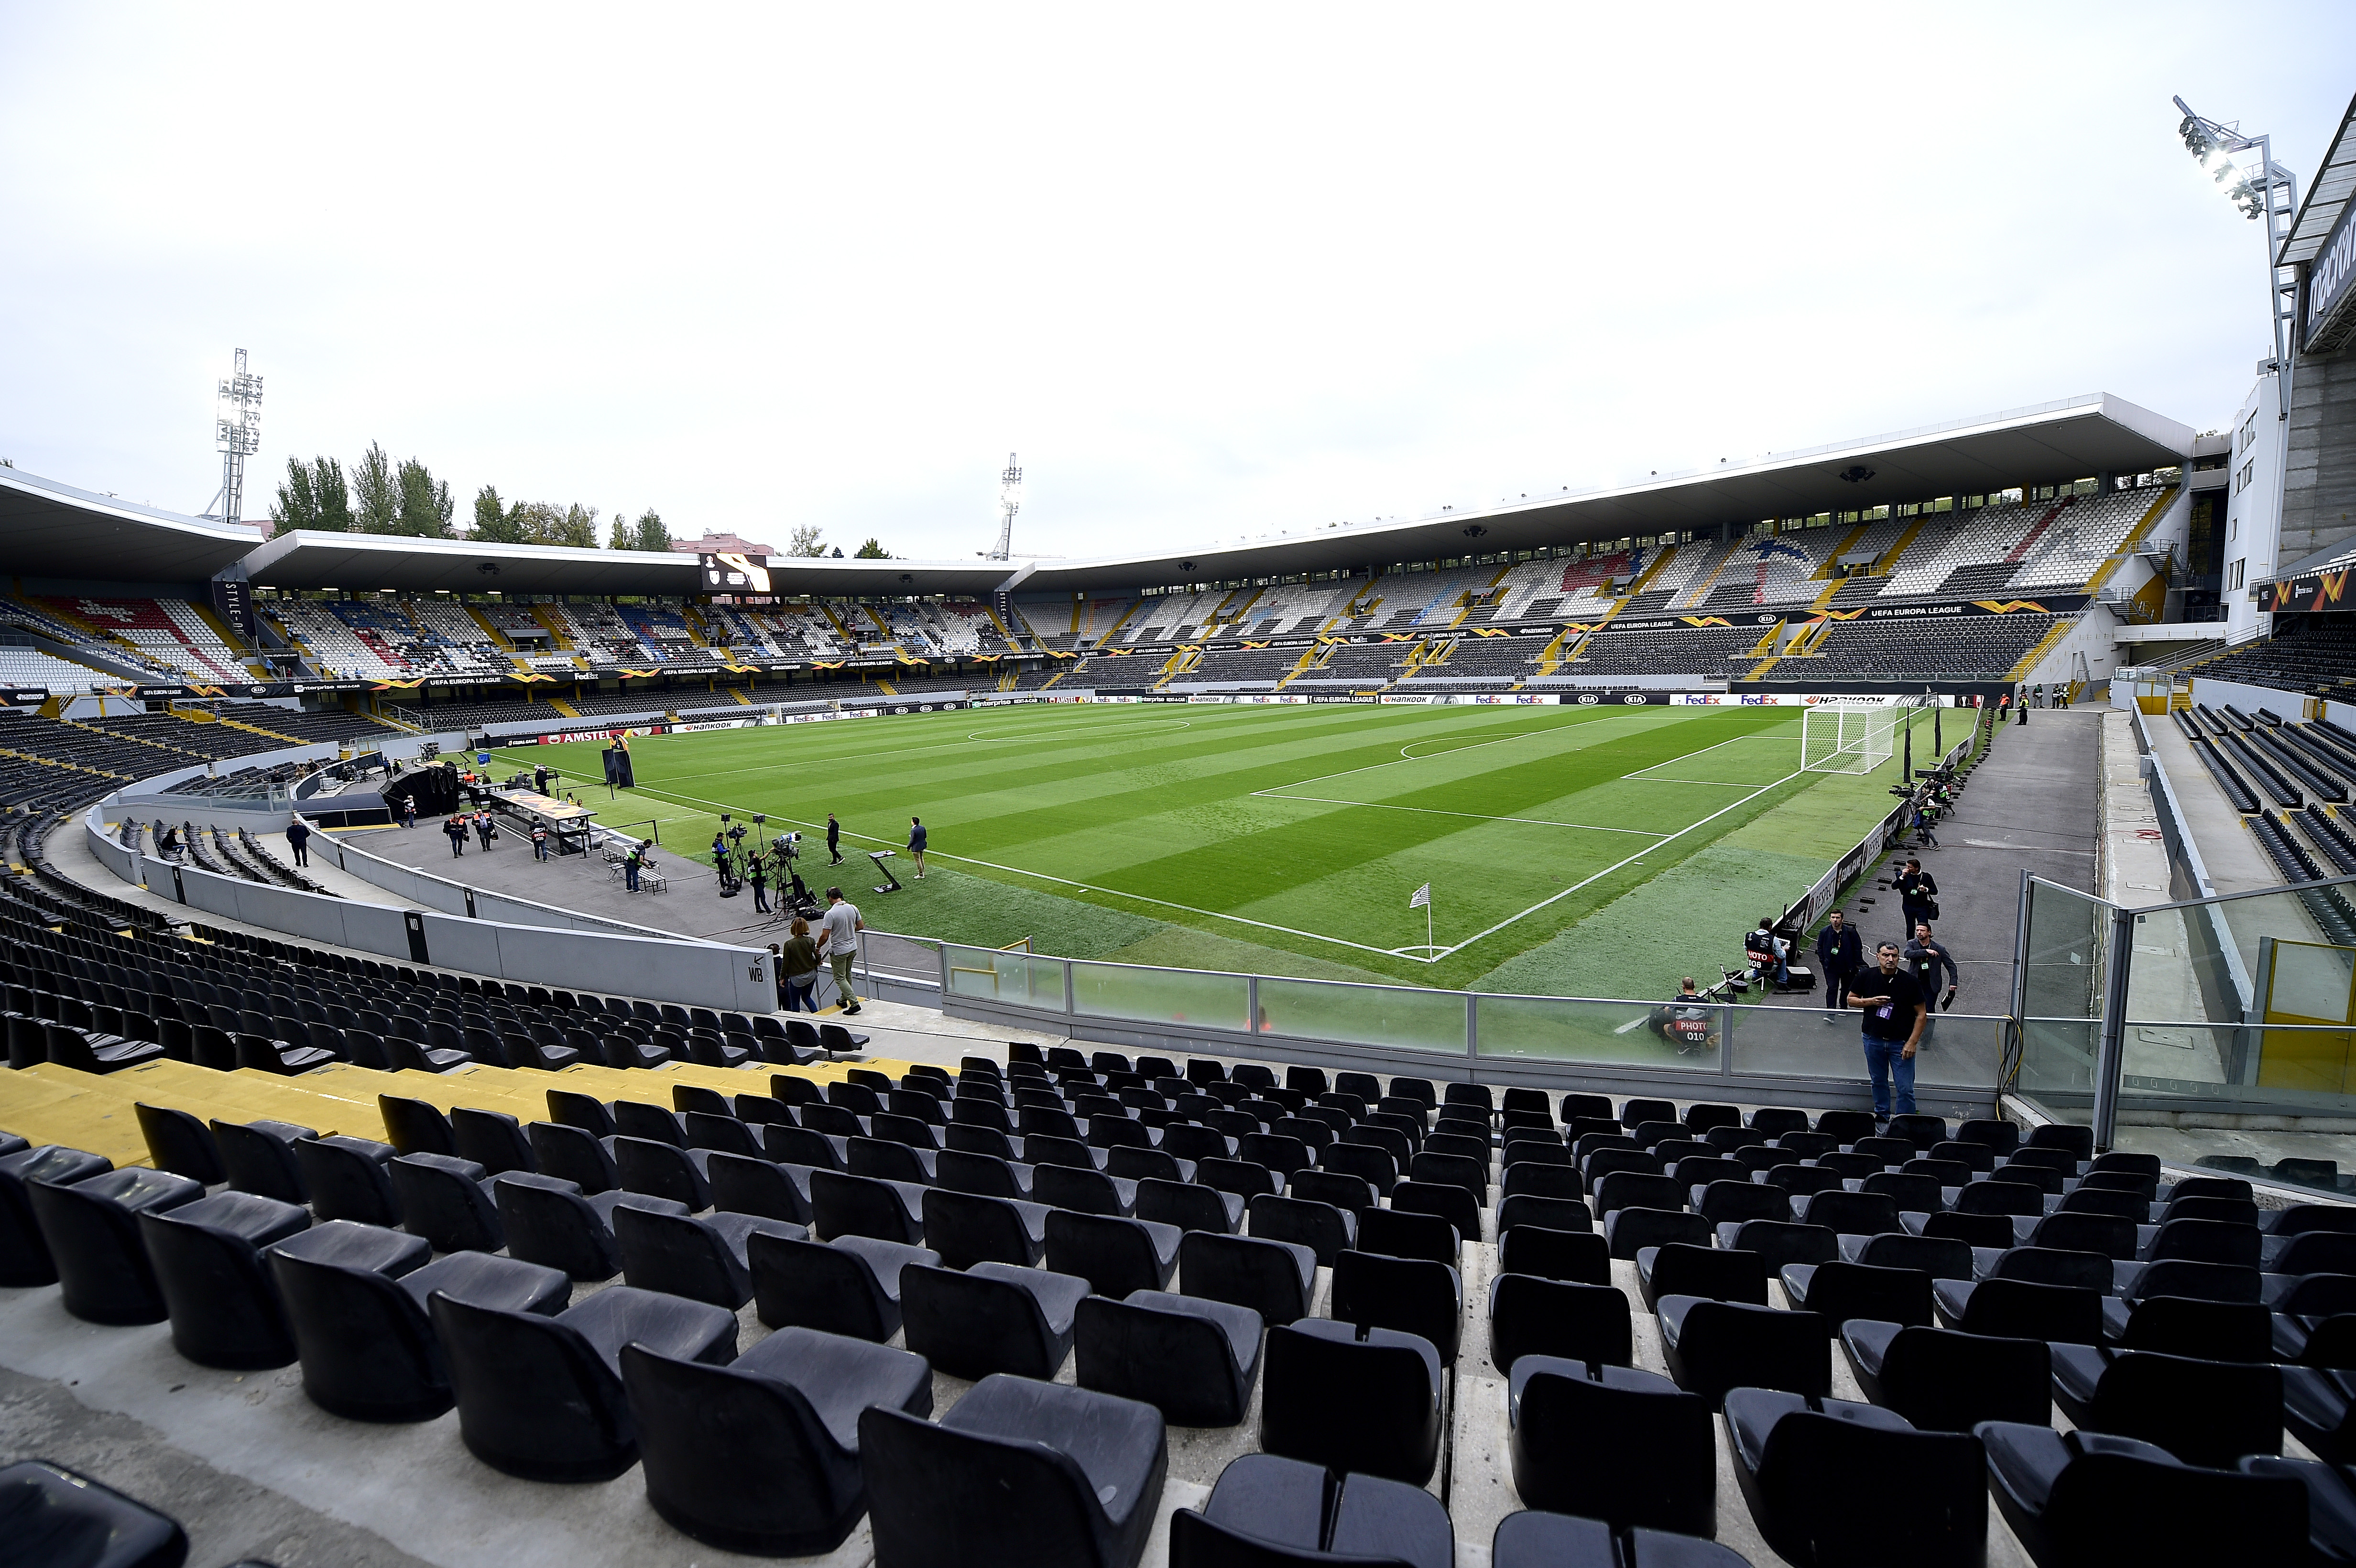 GUIMARAES, PORTUGAL - OCTOBER 03: General view inside the stadium prior to the UEFA Europa League group F match between Vitoria Guimaraes and Eintracht Frankfurt at Estadio Dom Afonso Henriques on October 03, 2019 in Guimaraes, Portugal. (Photo by Octavio Passos/Getty Images)